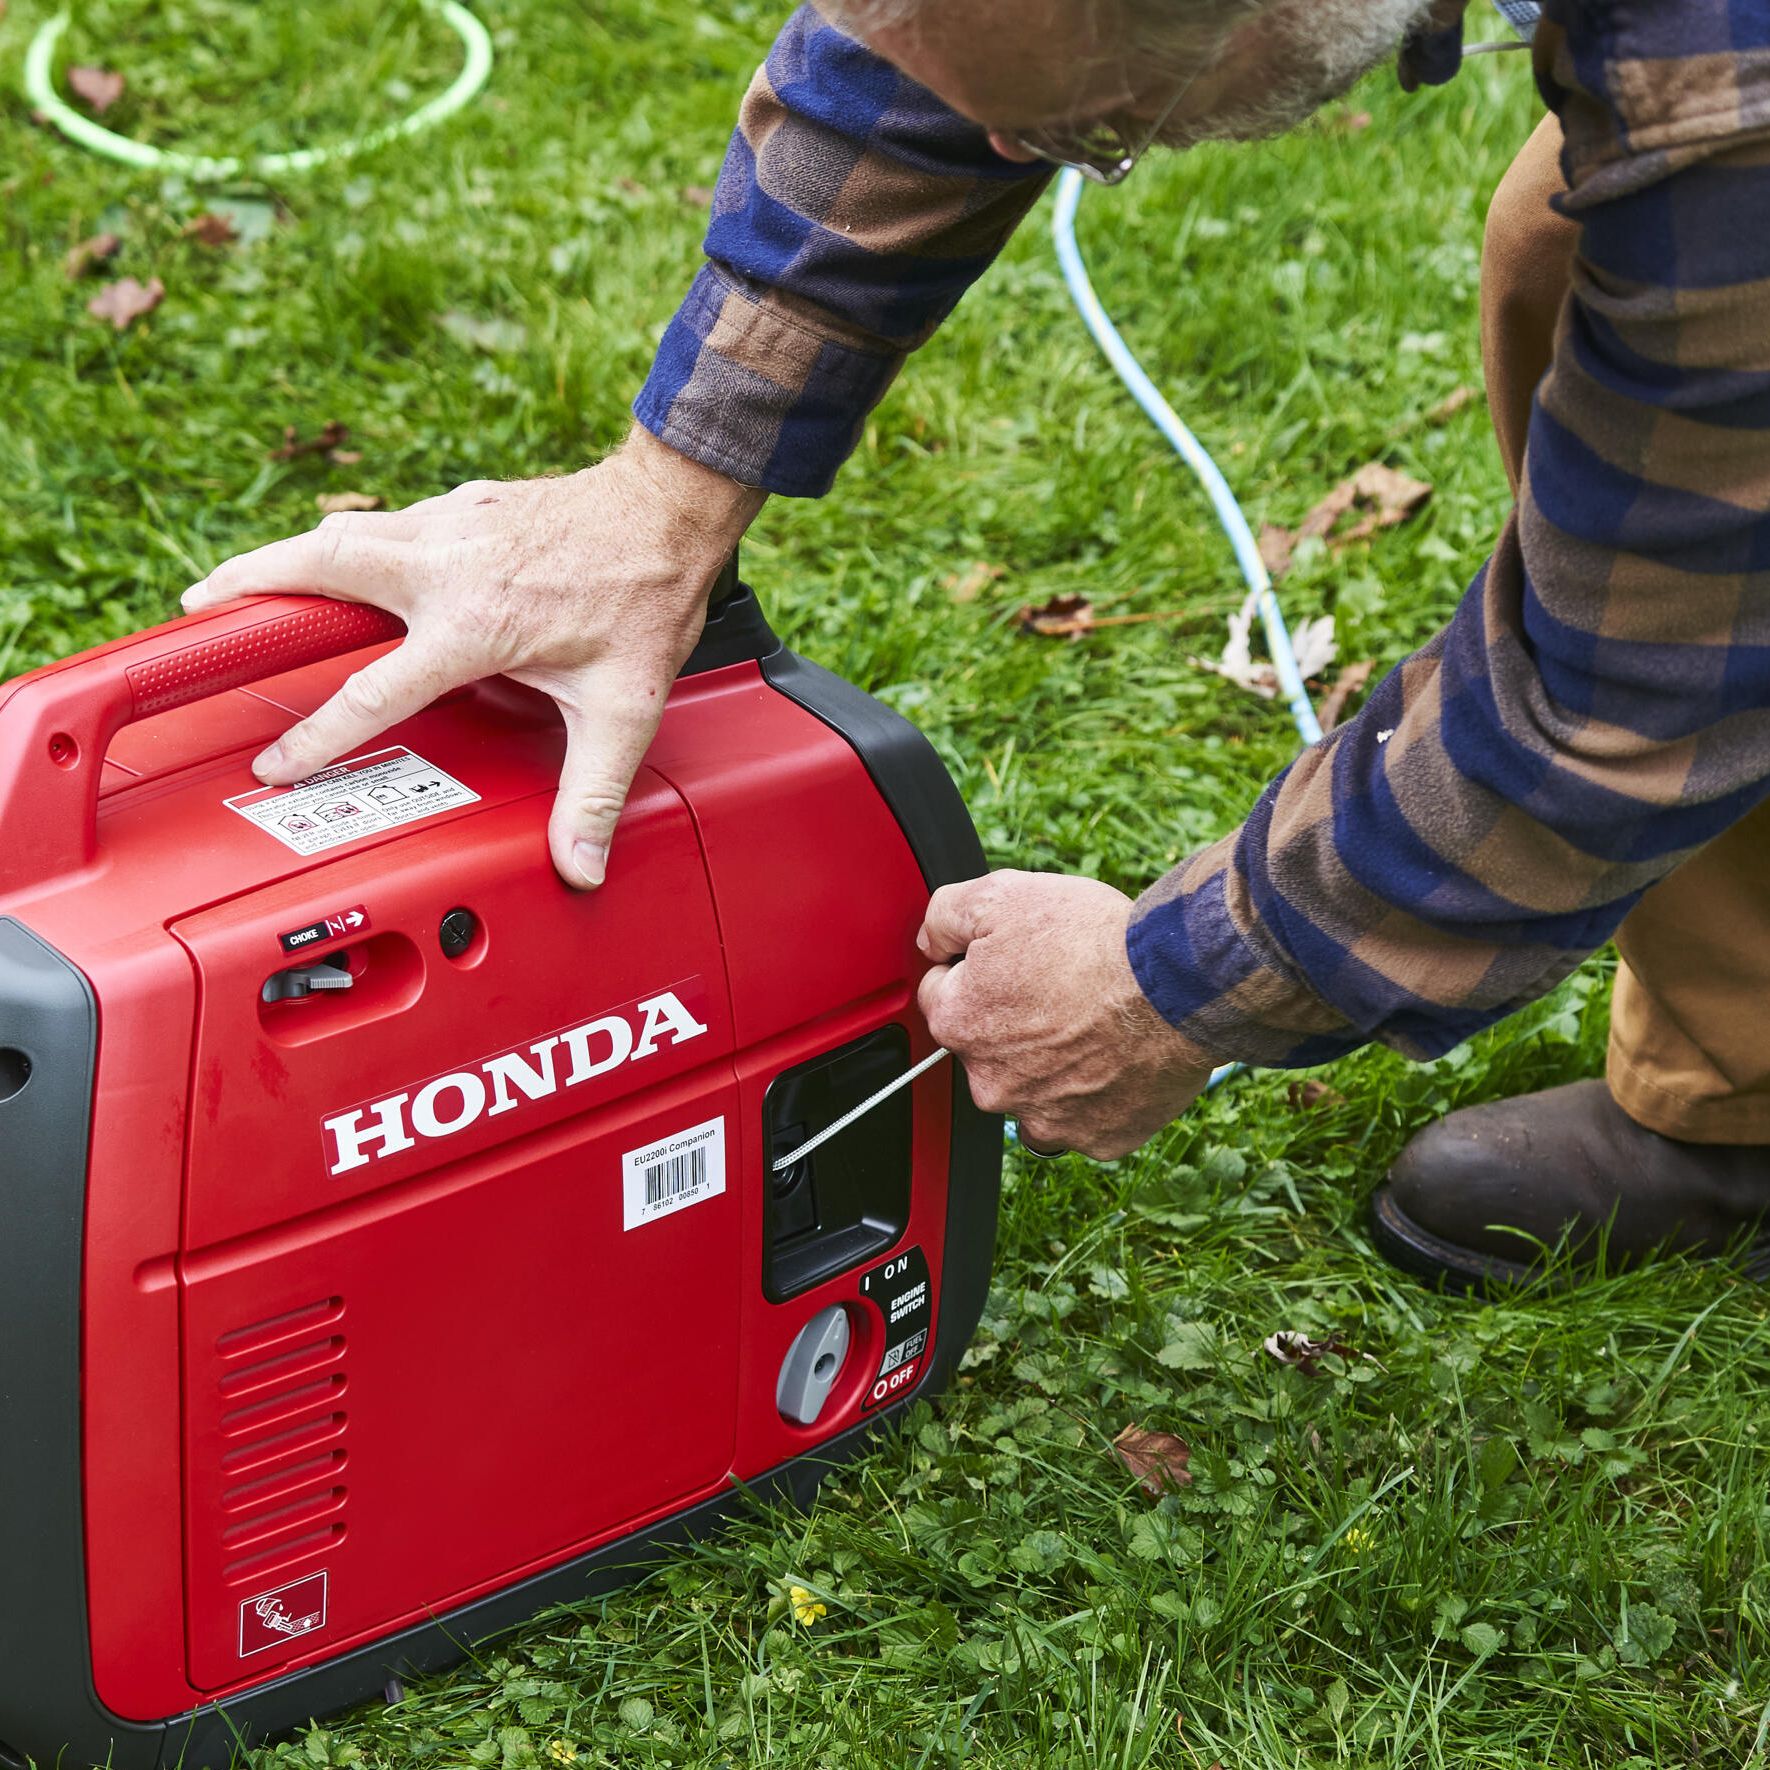 The Best Home Generators help you weather any storm.